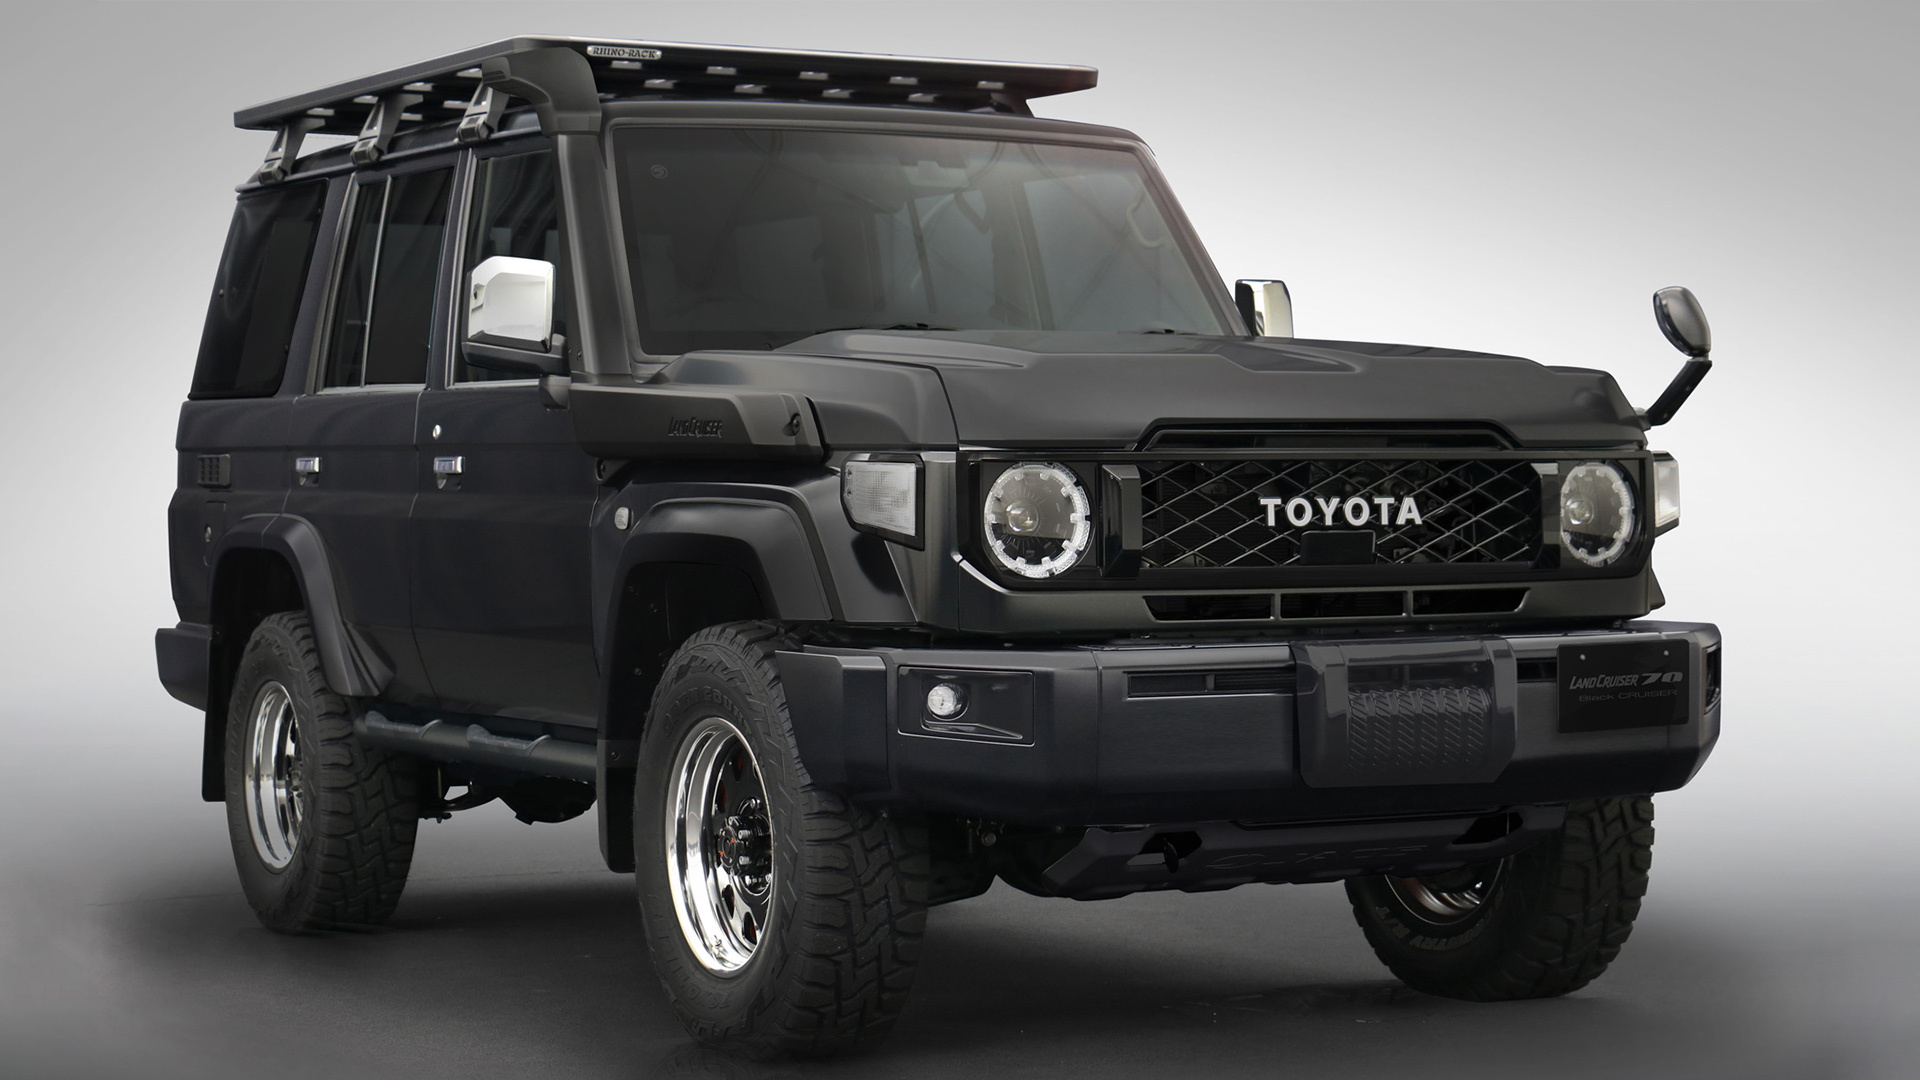 Matte Black Toyota Land Cruiser 70 Is Coming To The Tokyo Auto